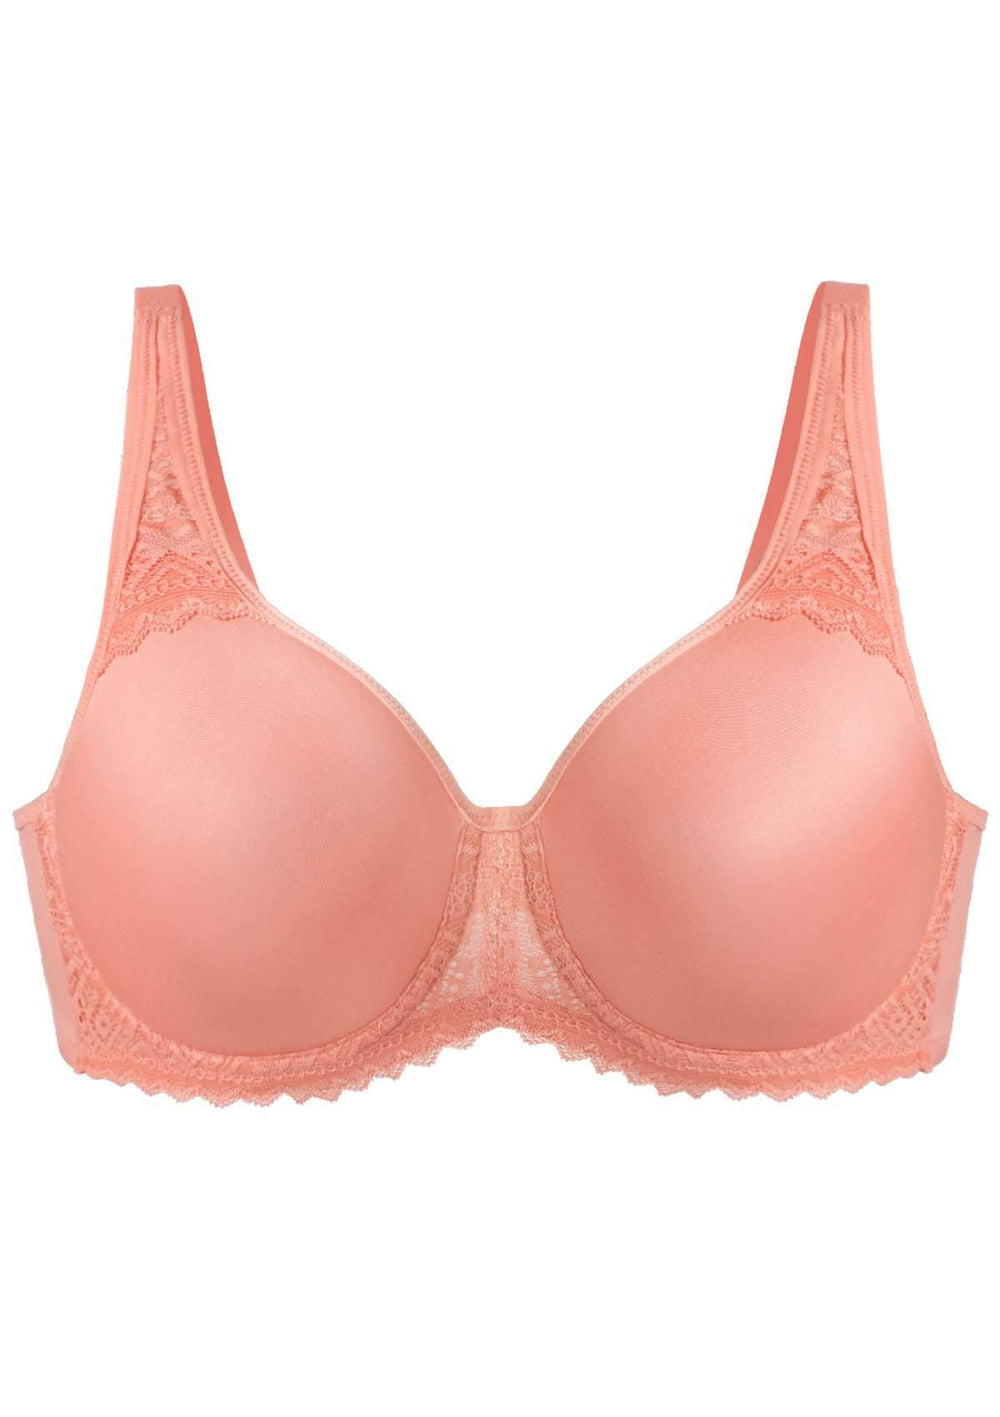 Hquowk Minimizer Bras for Women Full Coverage Sexy Mesh Lace